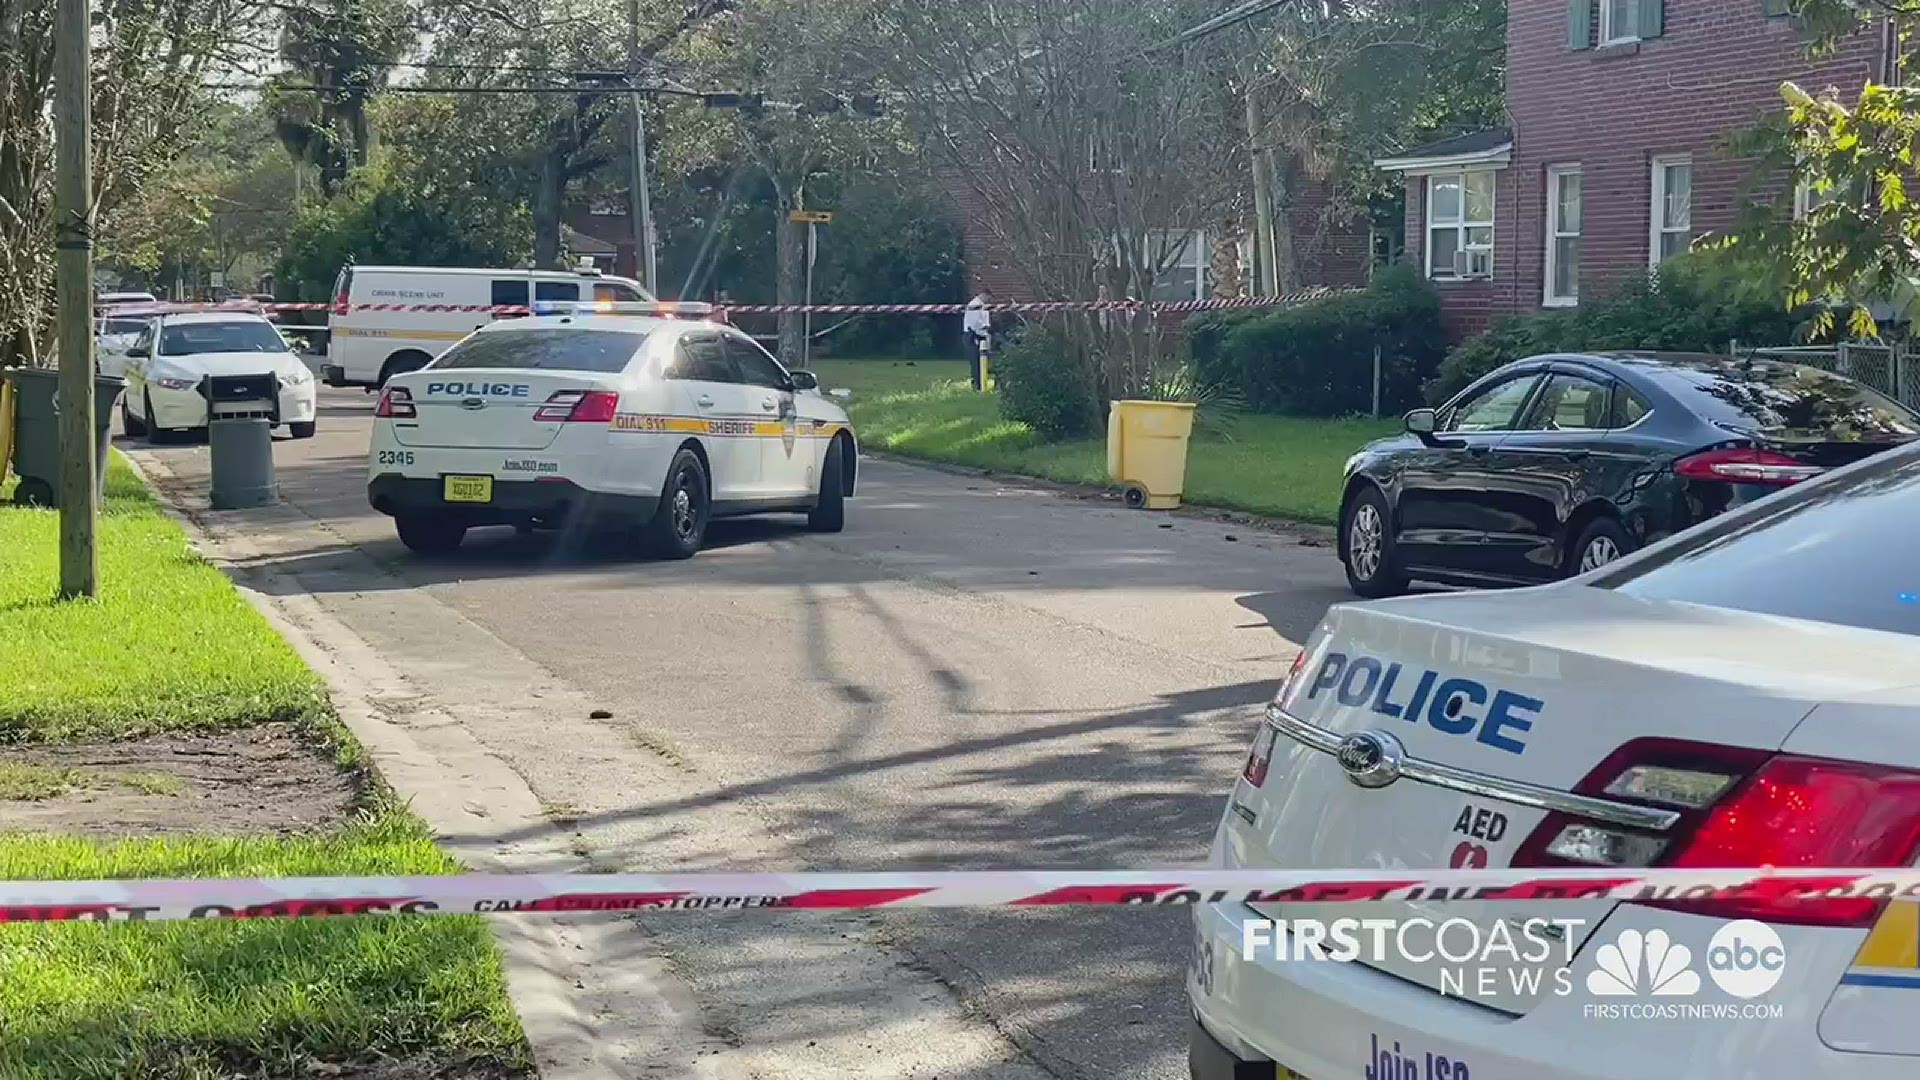 A 'high-school-aged' victim is in serious condition after the Jacksonville Sheriff's Office says he was shot multiple times by a female suspect.